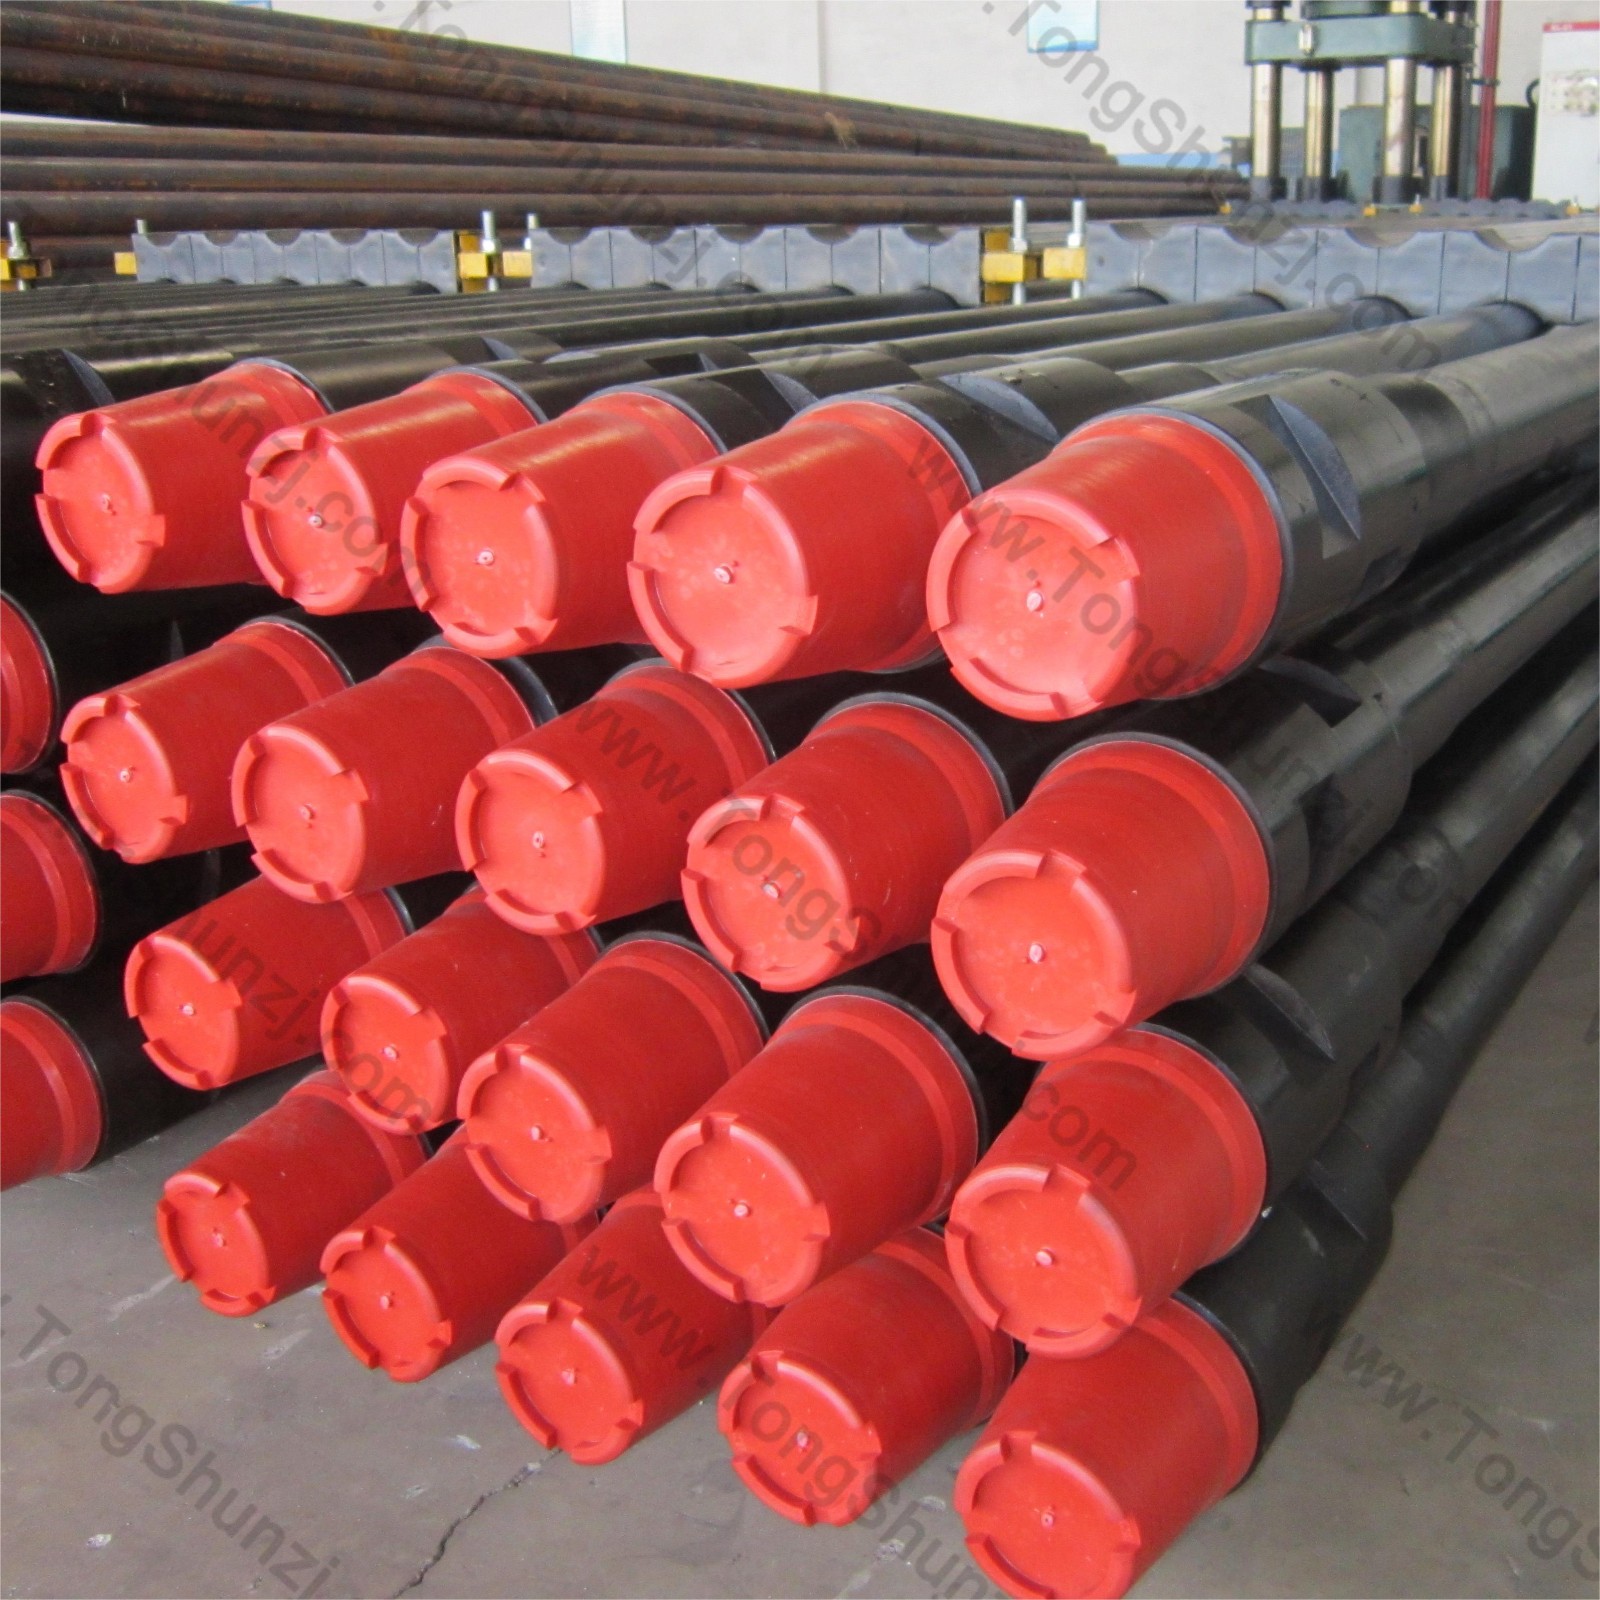 3 1/2 Inch Water Well Drill Pipe